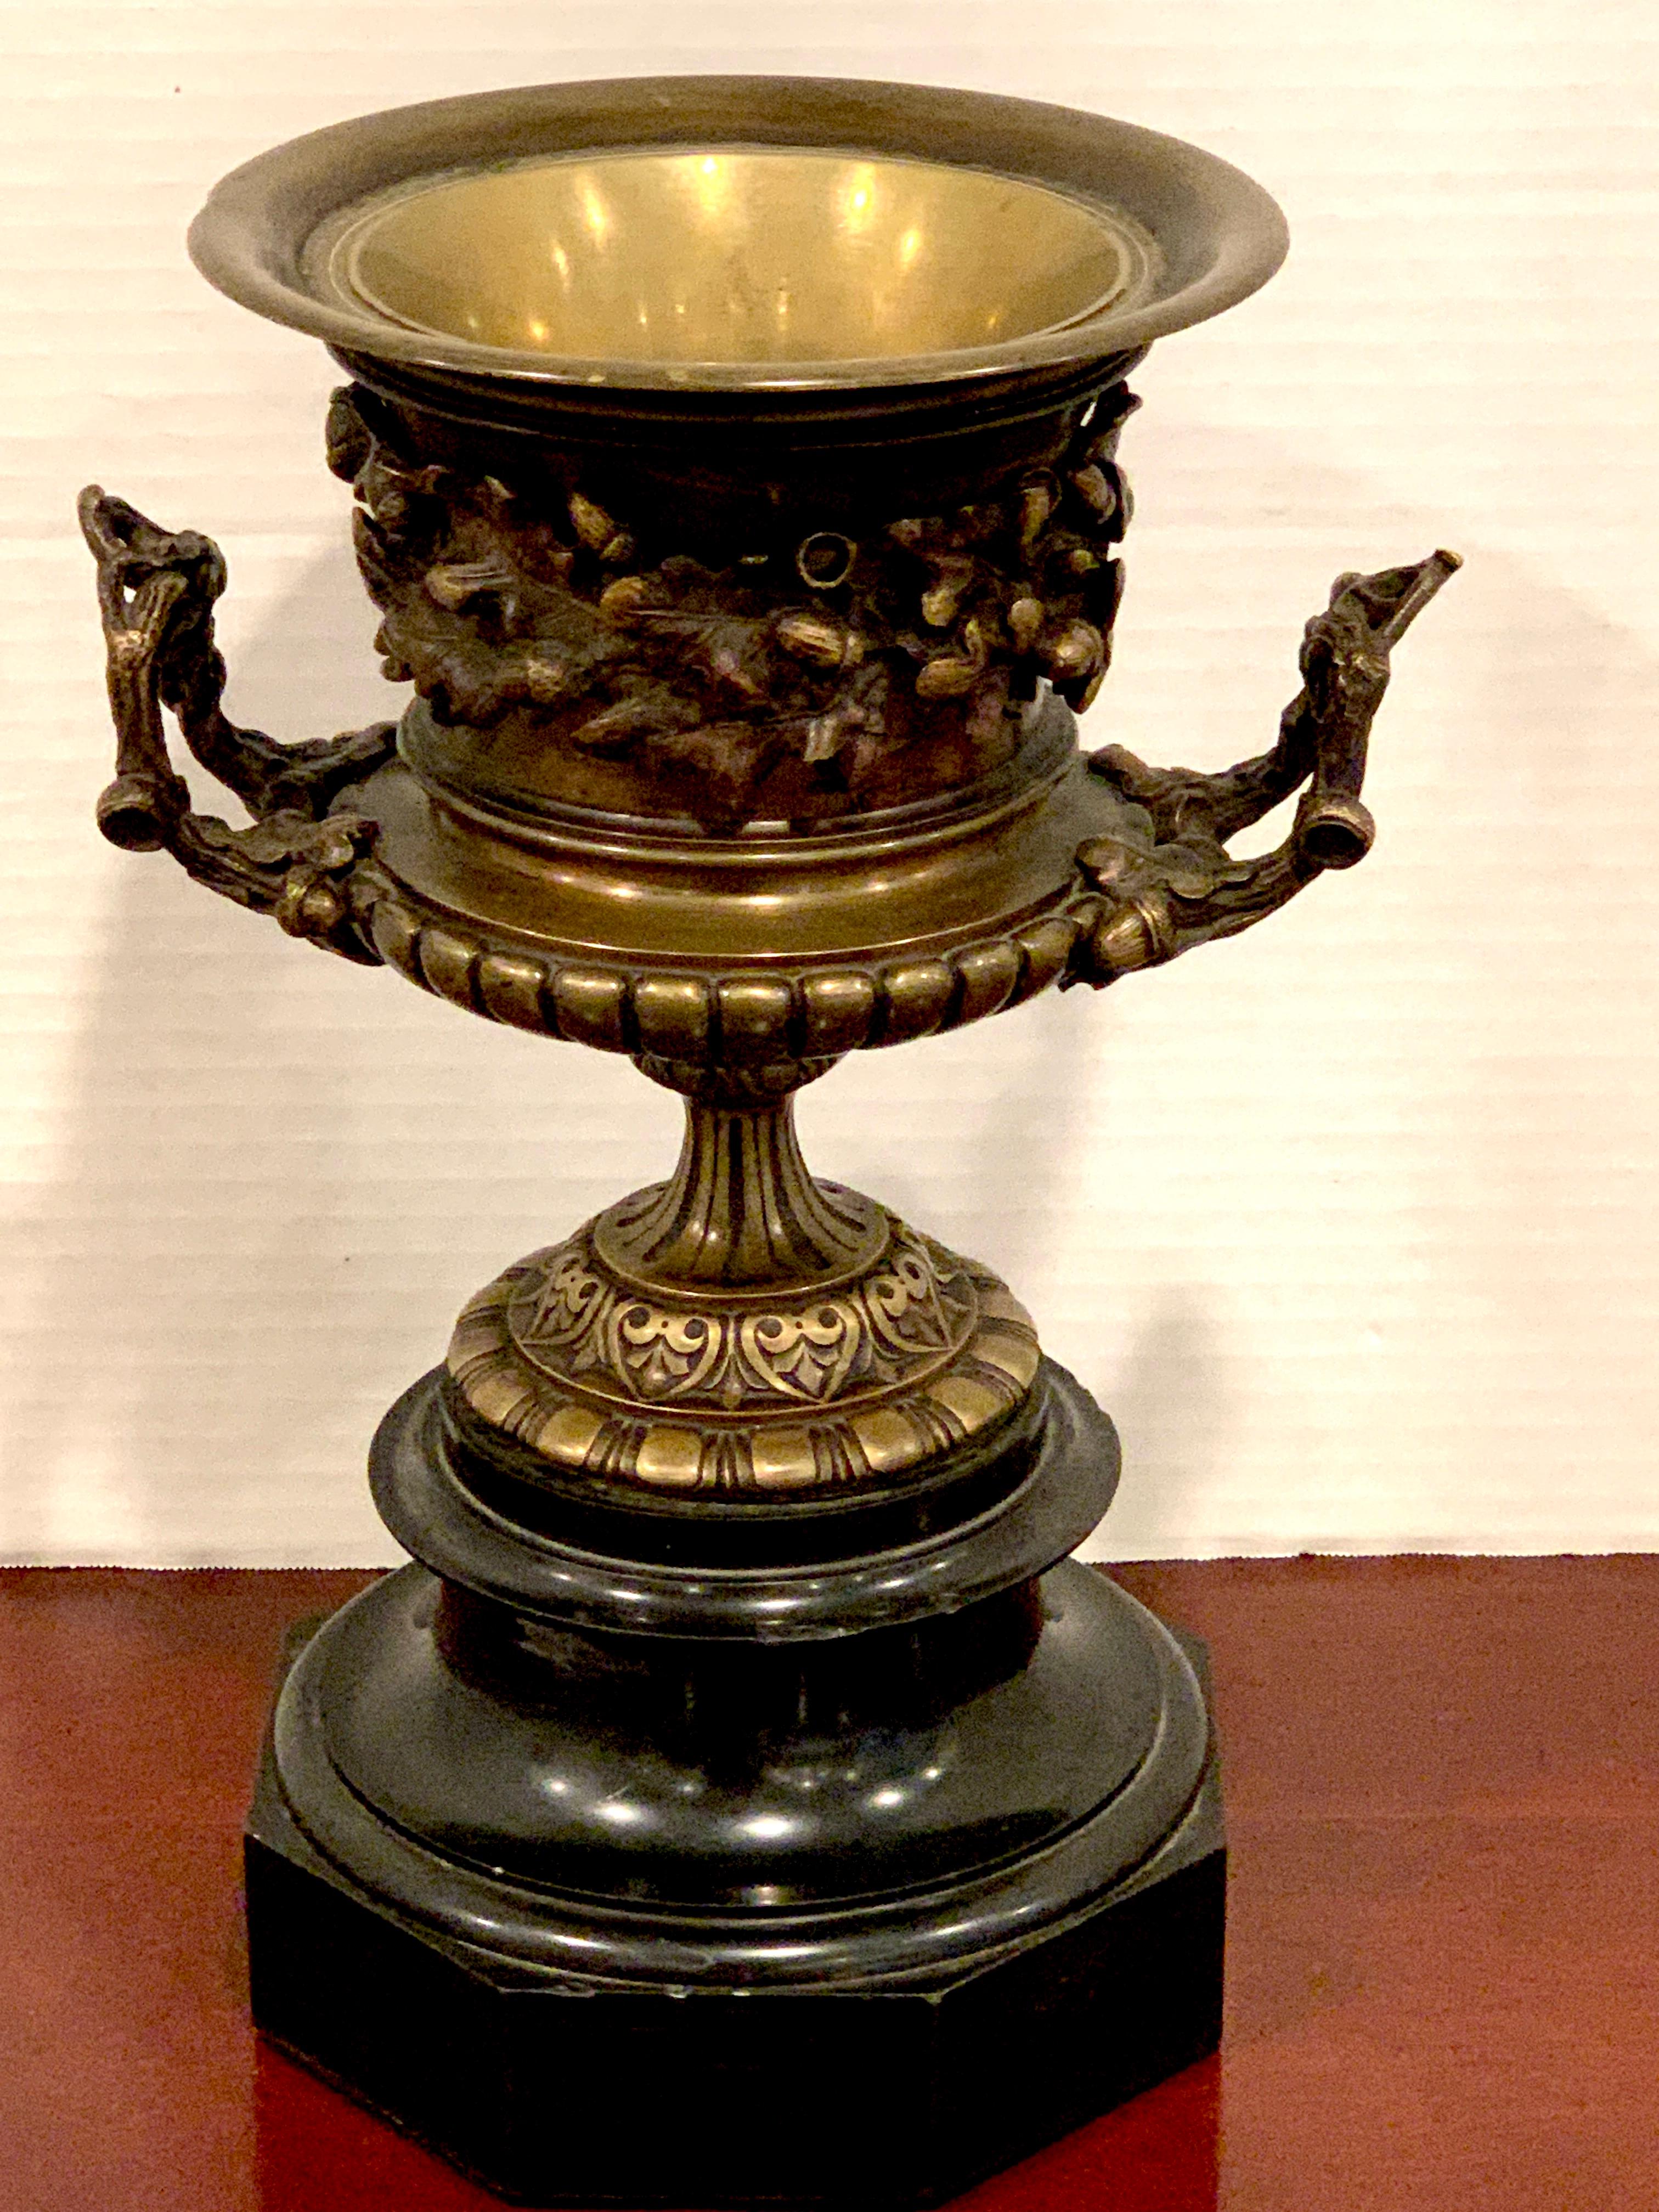 Grand Tour bronze and marble acorn motif urn, attributed to Barbedienne, beautifully cast with abundant acorns and foliage, raised on a 6.75